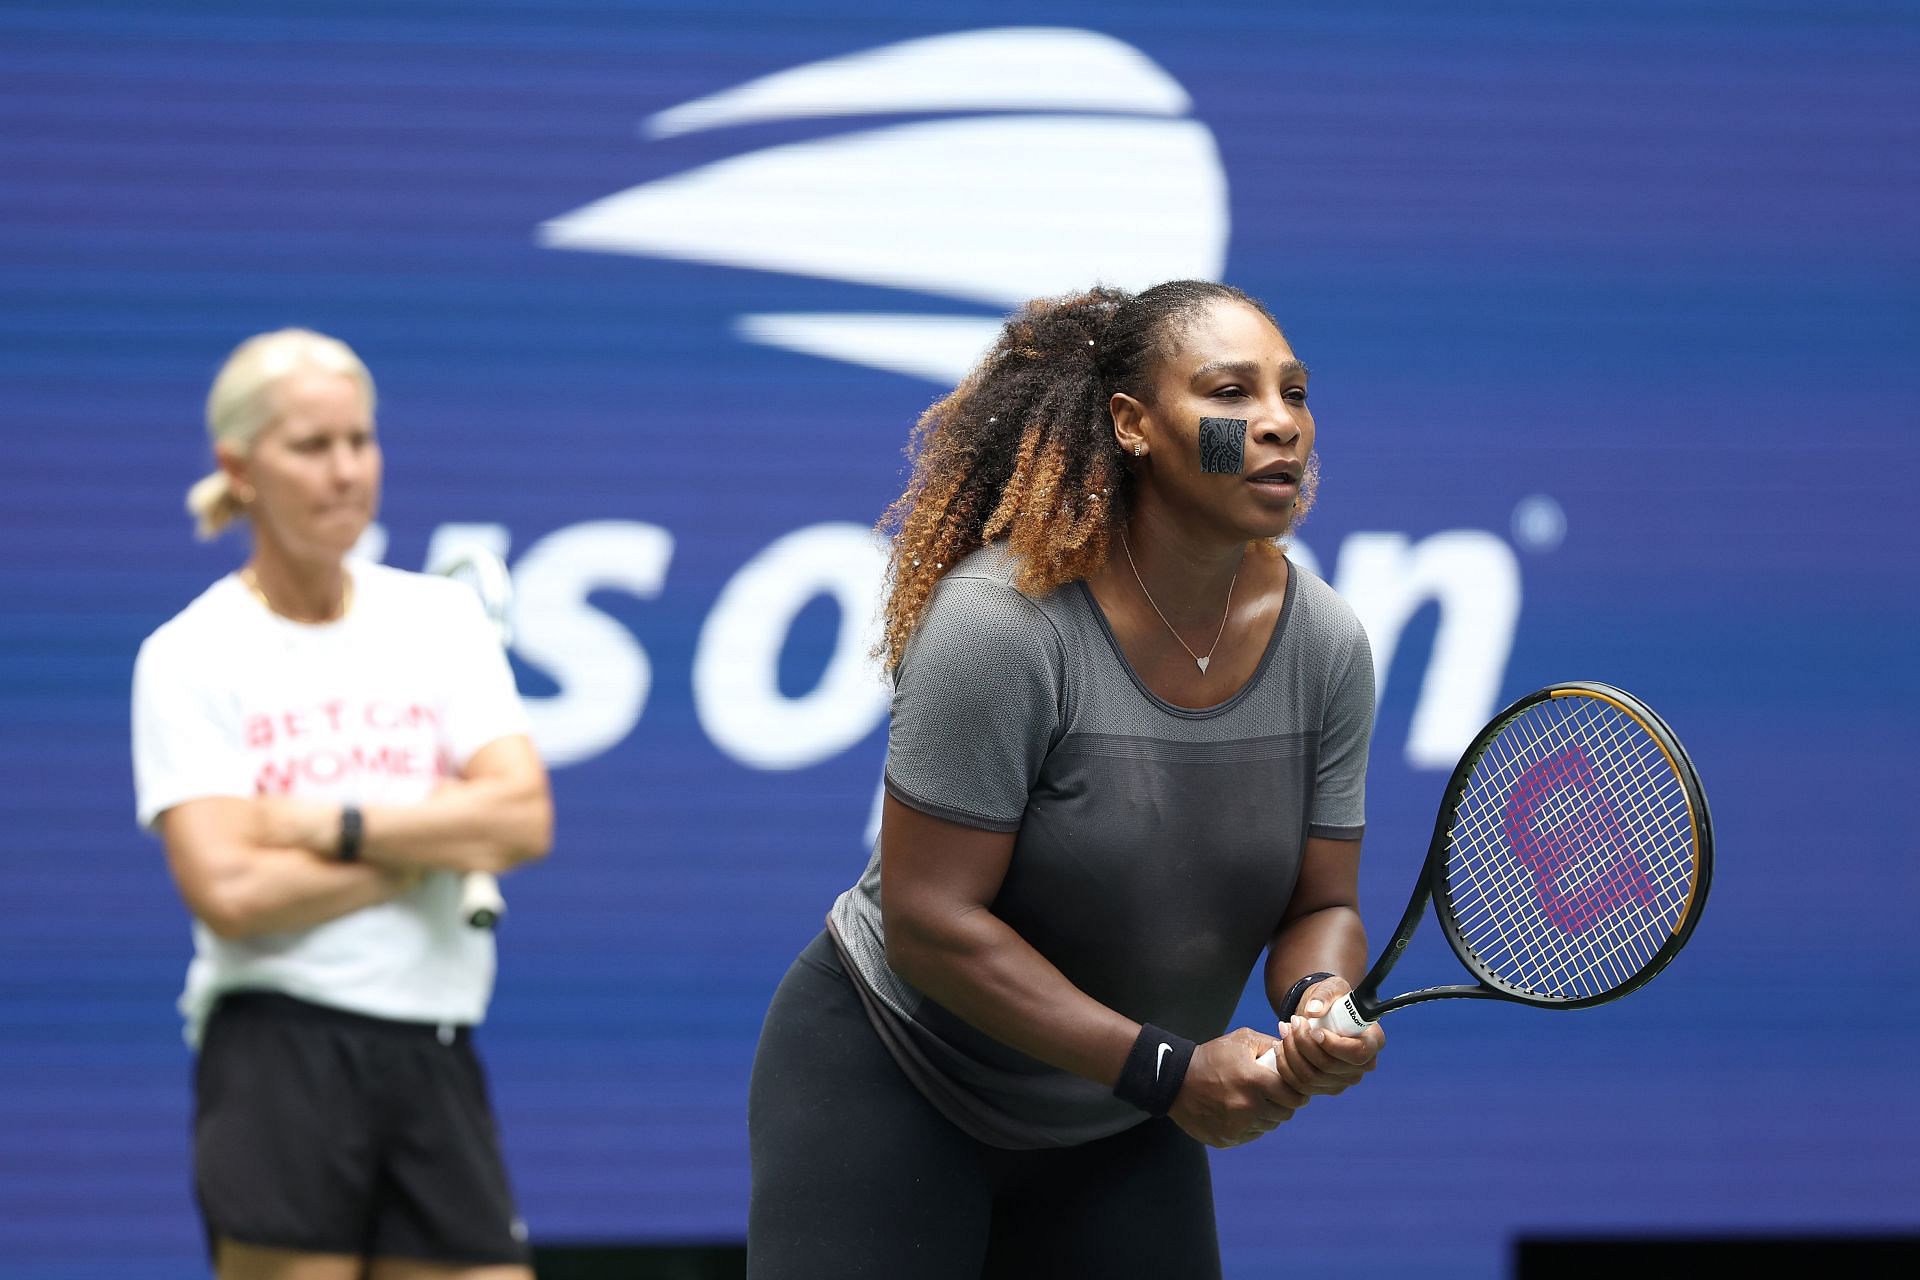 Rennae Stubbs coaches Serena Williams during practice in preparation for the 2022 US Open - Previews